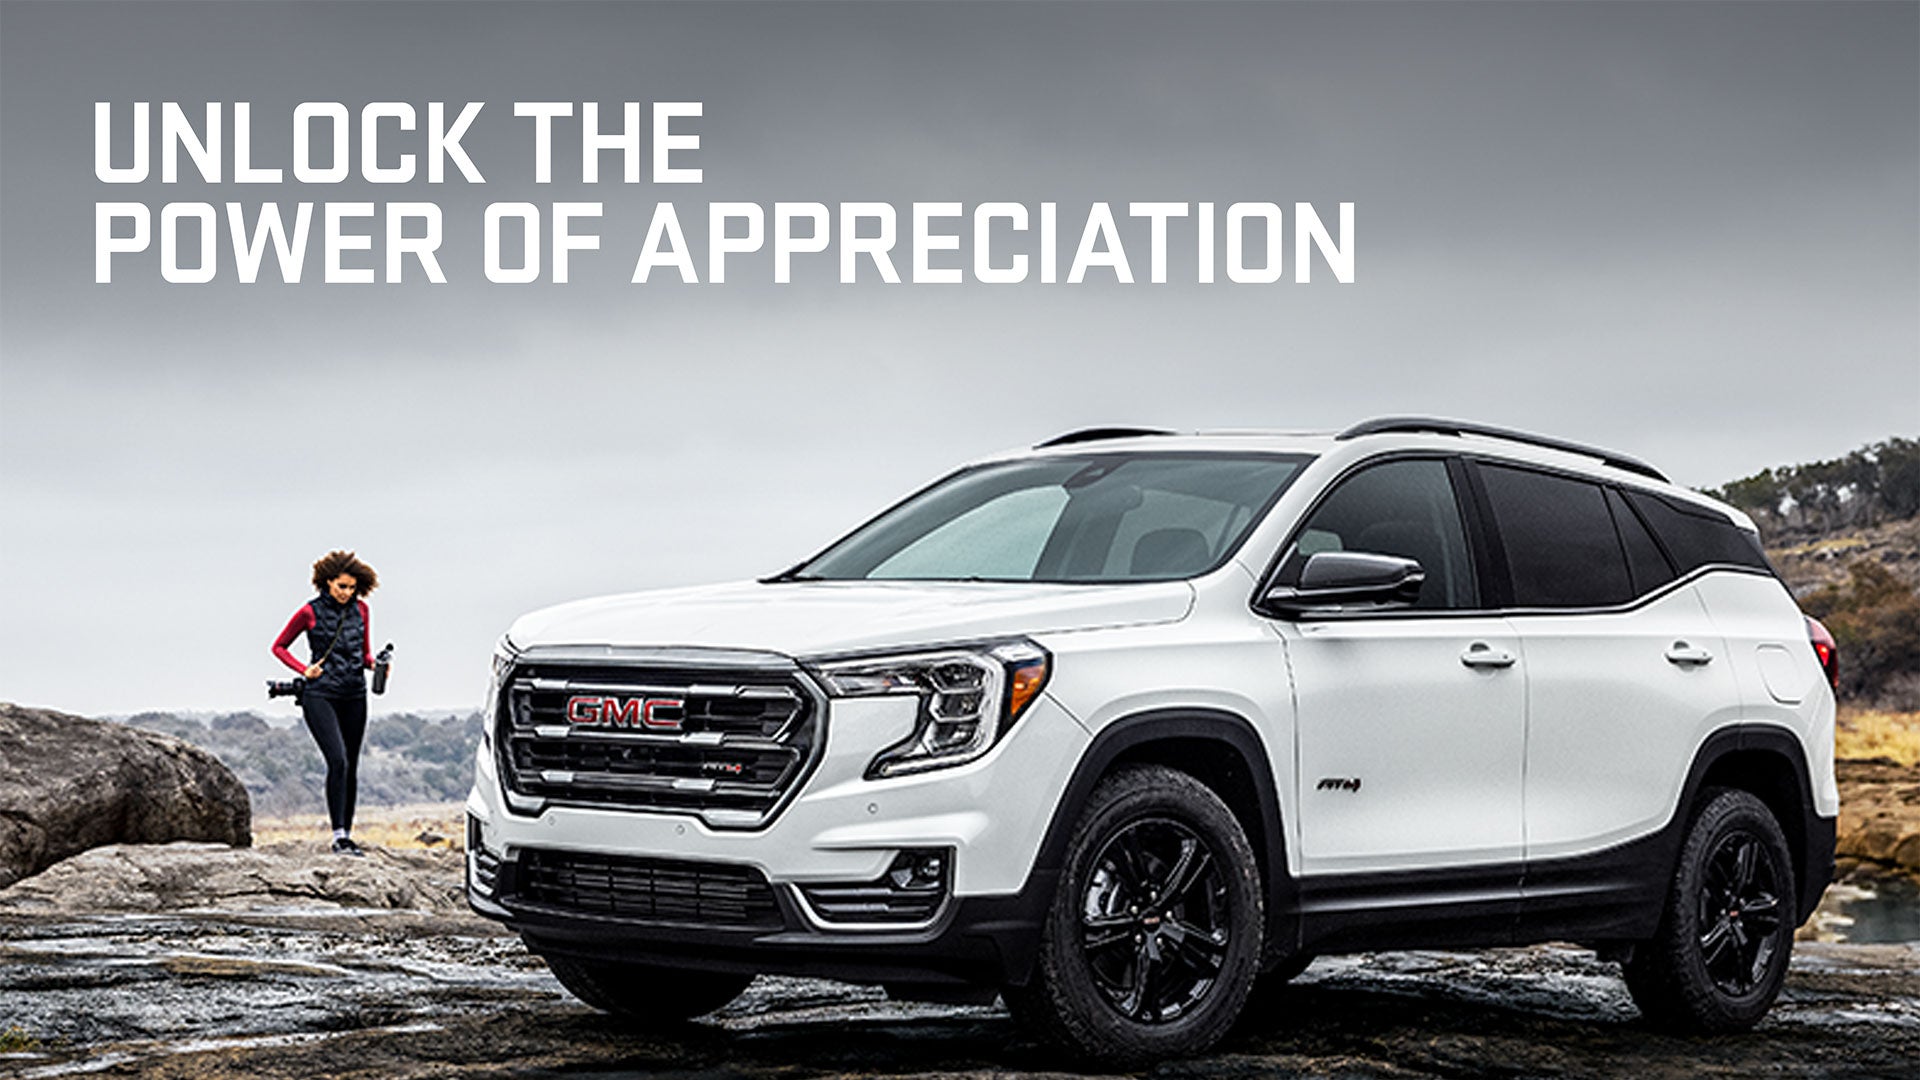 Unlock the power of appreciation | Valley Buick GMC of Hastings in hastings MN